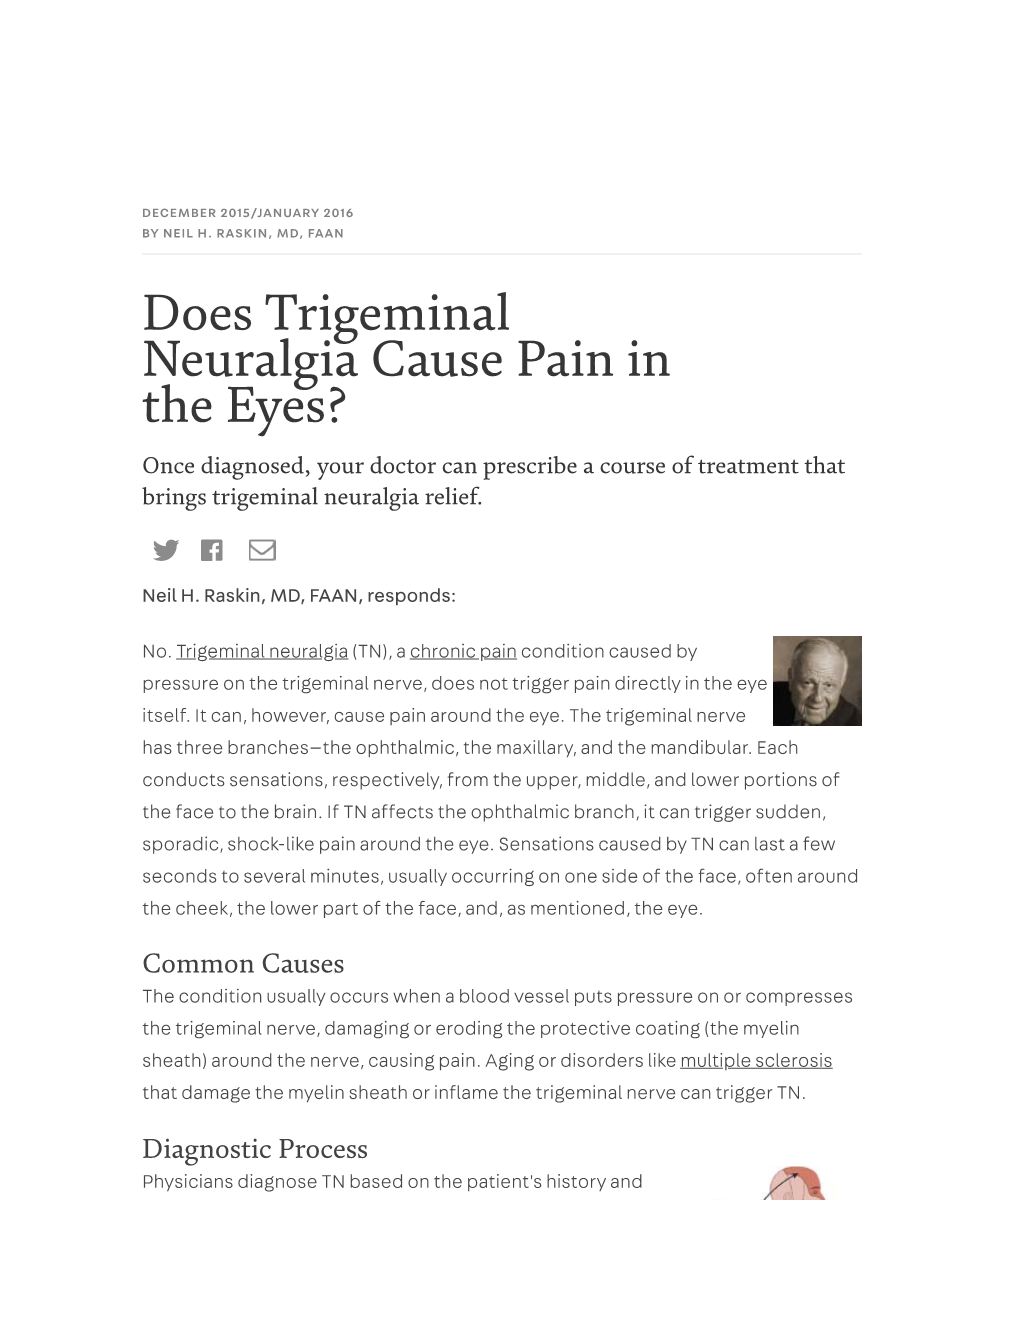 Does Trigeminal Neuralgia Cause Pain in the Eyes?